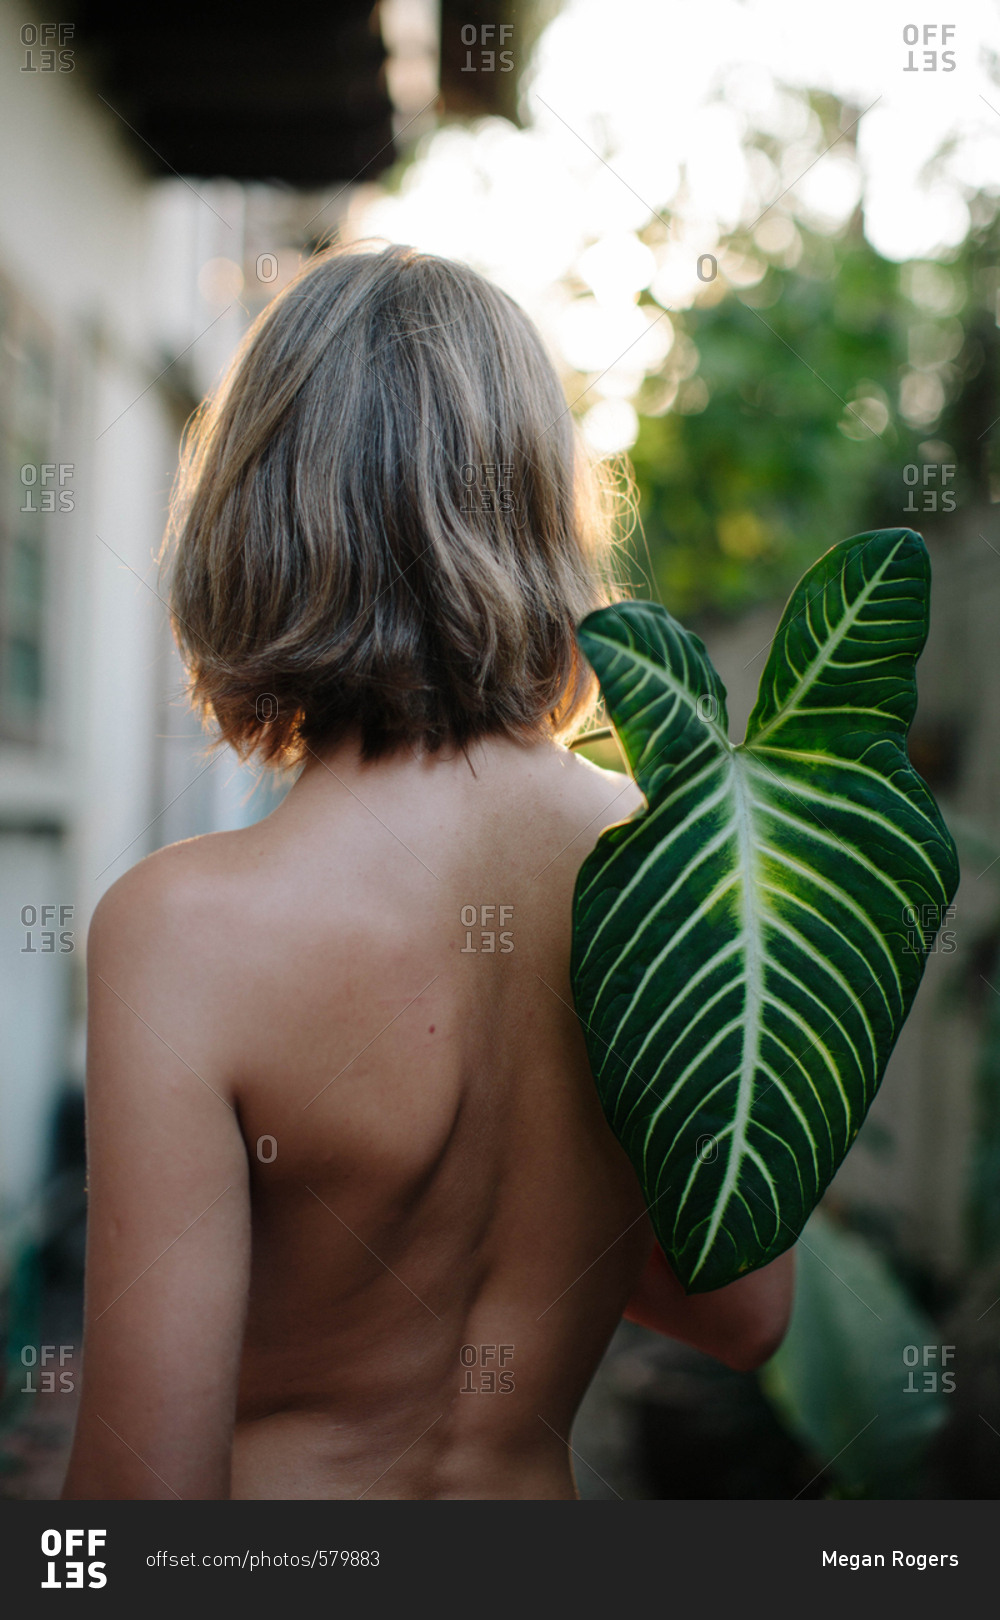 Young topless woman facing away from camera holding a large tropical leaf over her back